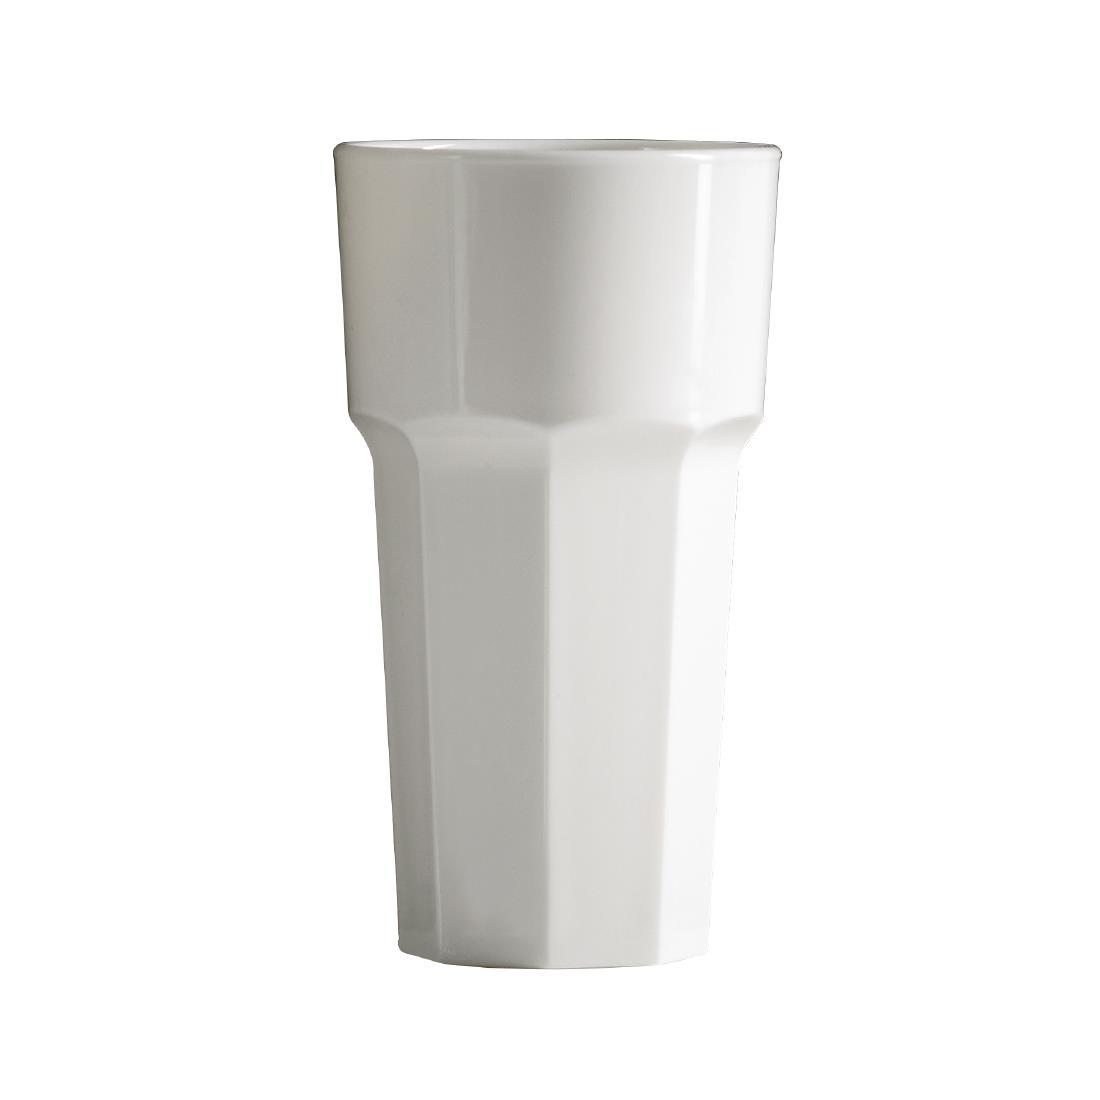 BBP Polycarbonate Tumbler 340ml White (Pack of 36) - DC410  - 1